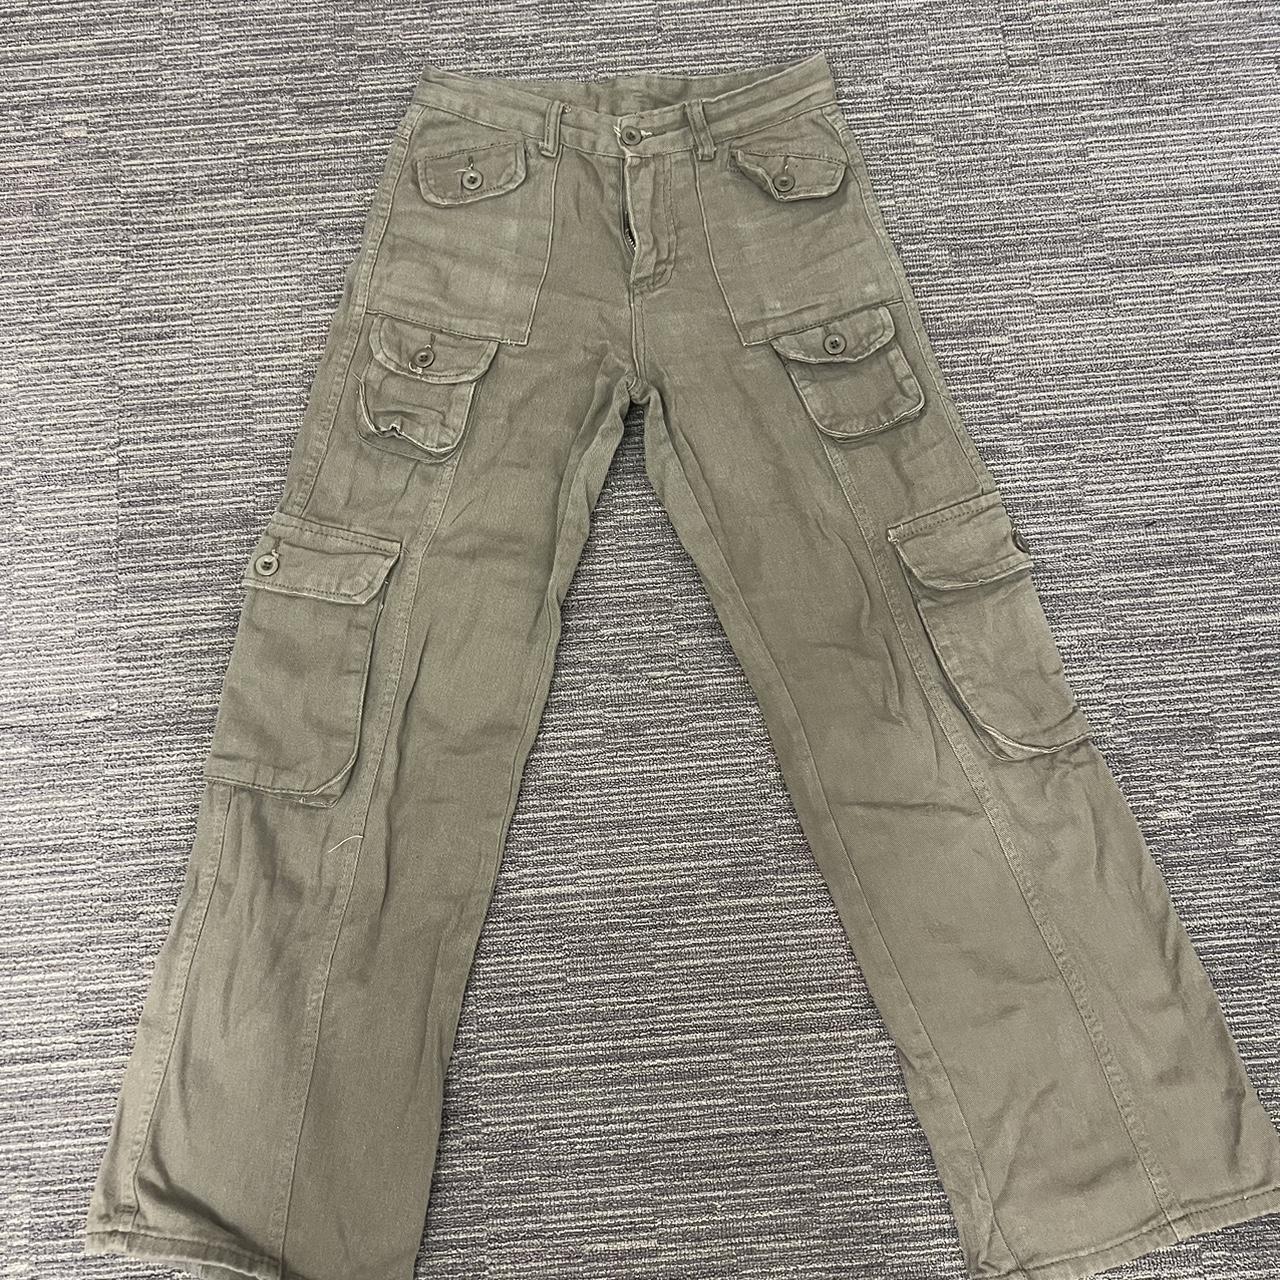 army green cargo pants #cargoes - Depop